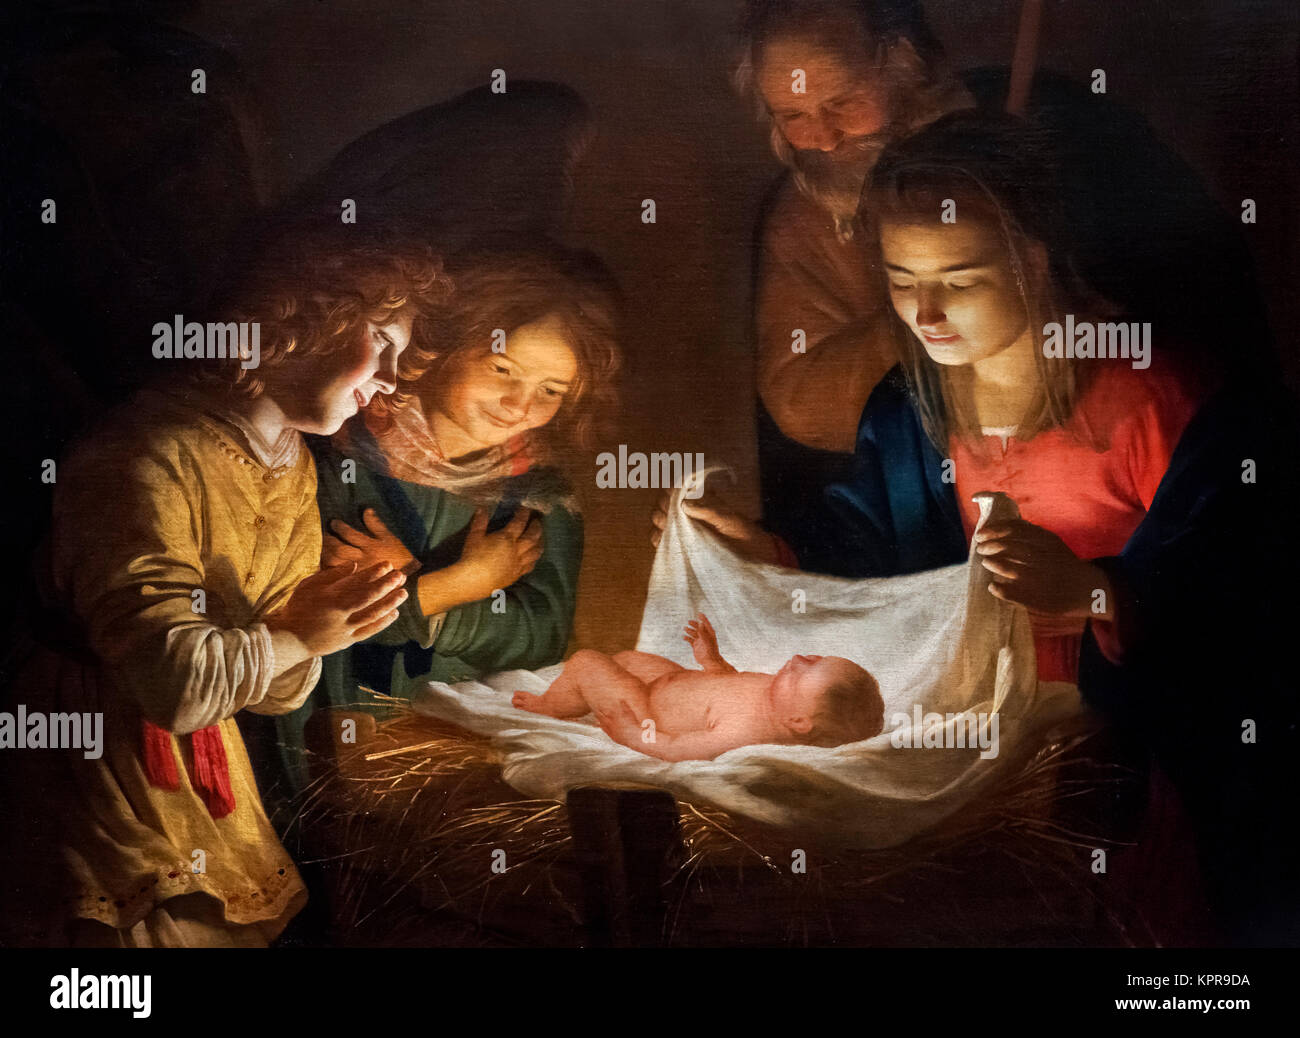 Adoration of the Child by Gerrit van Honthorst (Gherardo delle Notti, c. 1592-1656), oil on canvas, 1619-20. The painting shows a nativity scene with the baby Jesus, the Virgin Mary, Joseph and two angels. Stock Photo